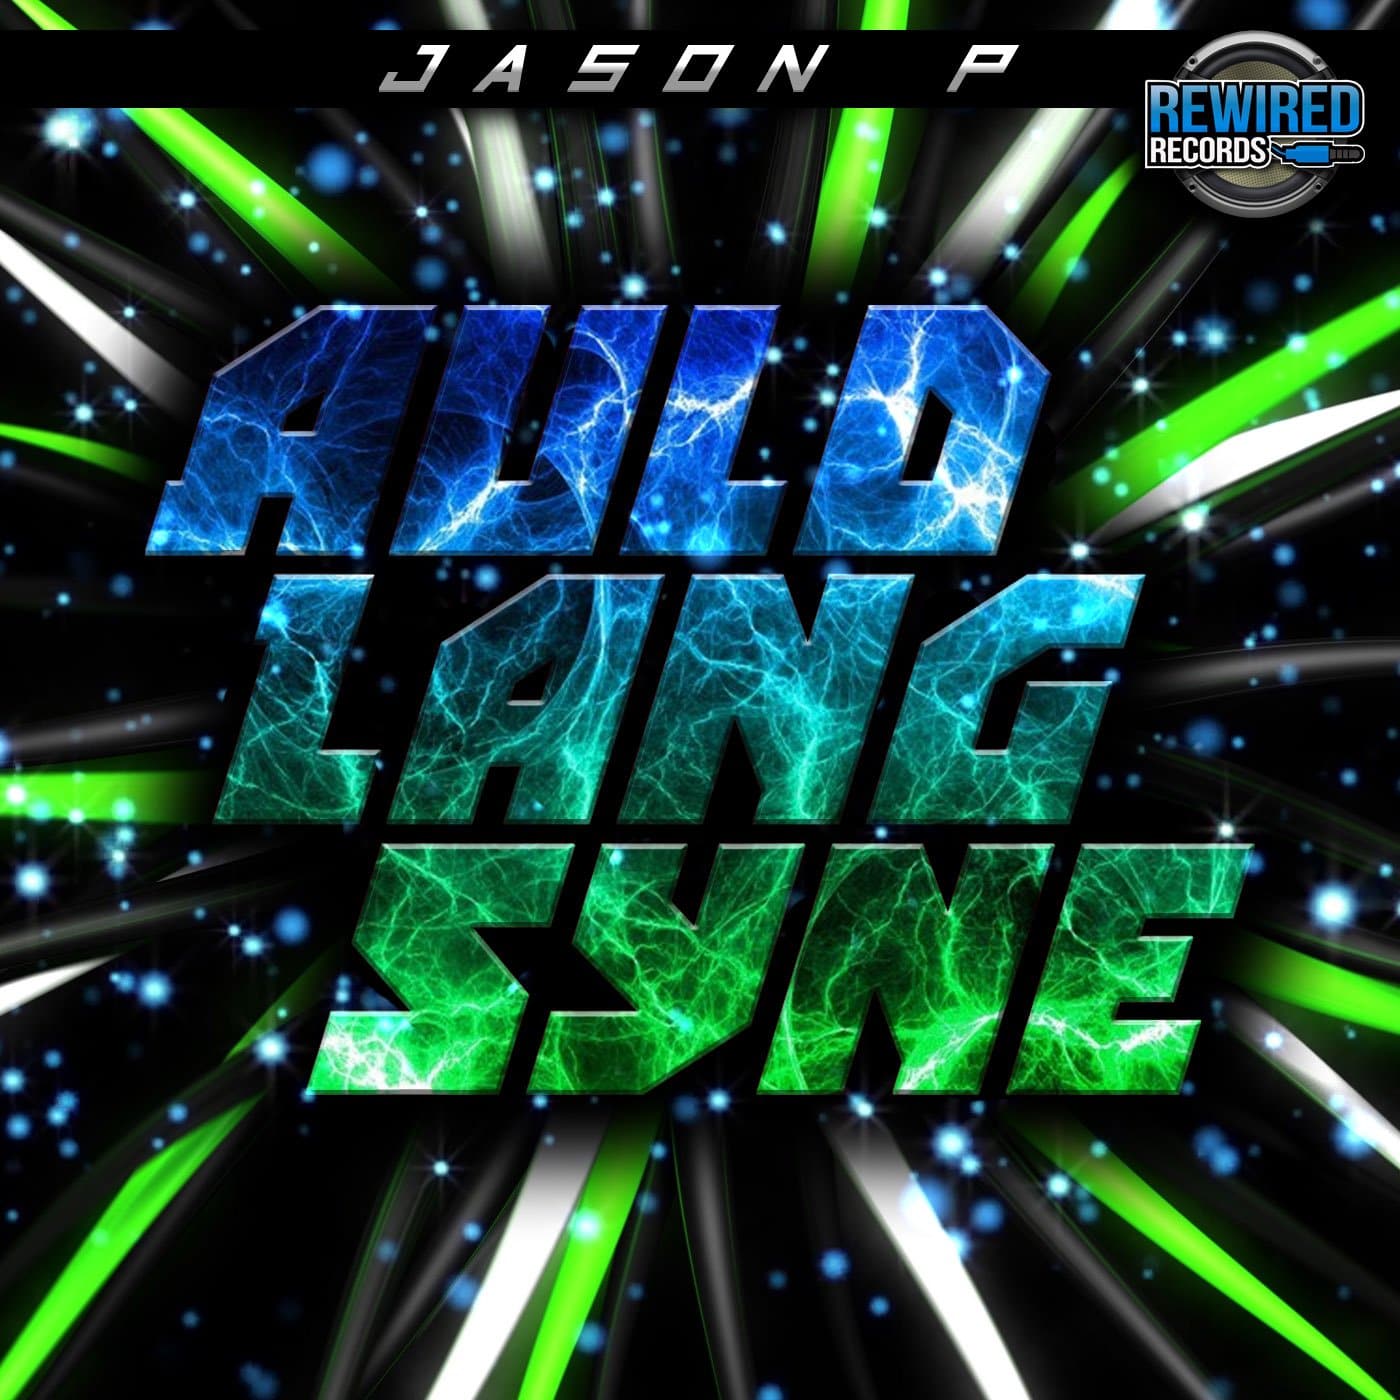 Jason P - Auld Lang Syne - Rewired Records